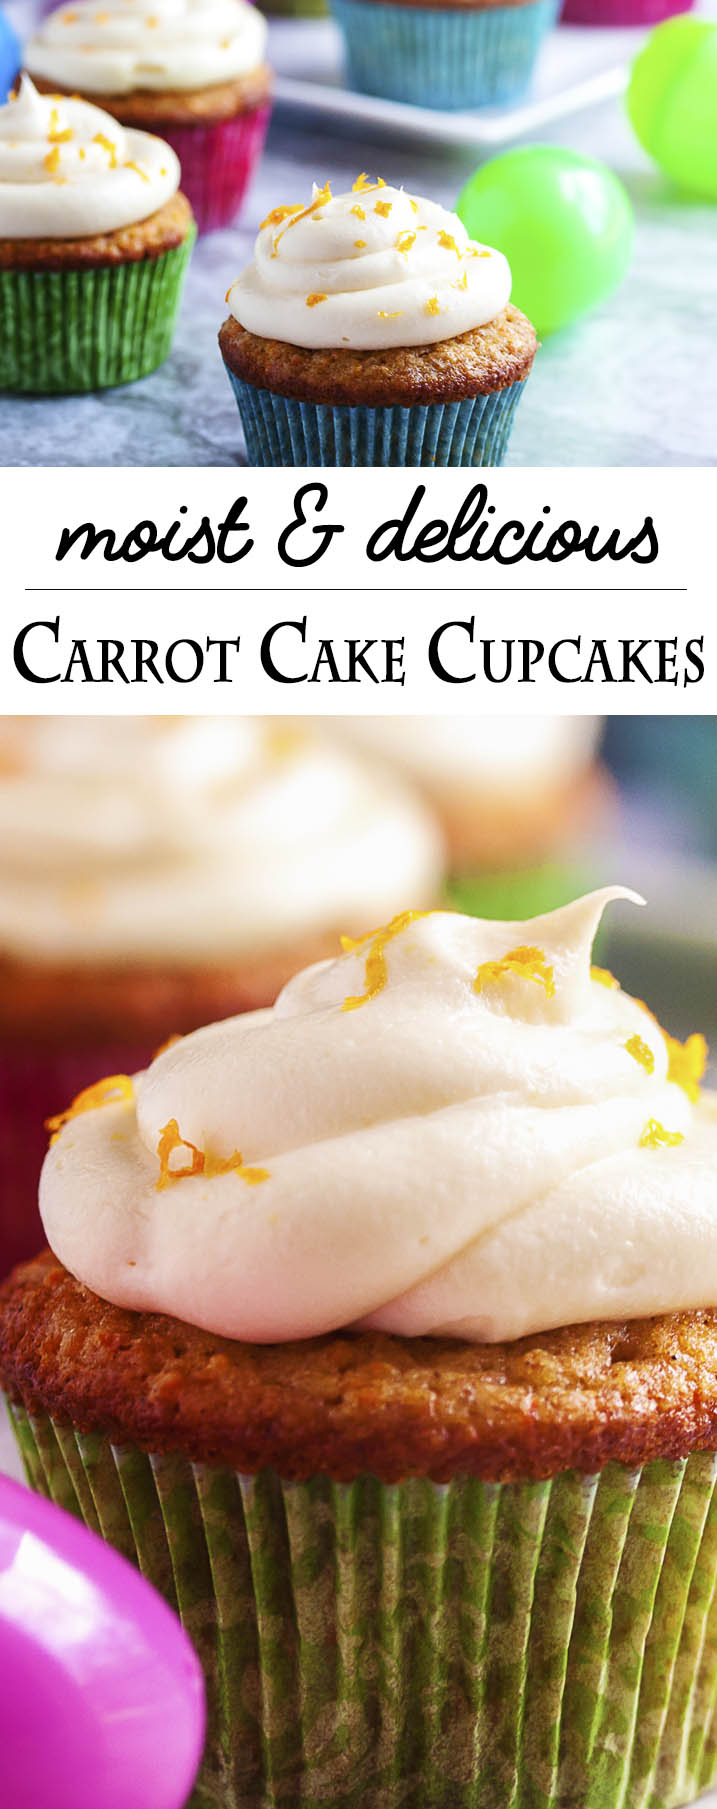 Moist Carrot Cake Cupcakes with Cream Cheese Frosting - Grinding up the carrots packs more carrots into each cupcake and makes these cupcakes extra moist and delicious! Creaming the butter and sugar together provides an extra tender crumb and a mostly flat top which is perfect for the lightly sweetened cream cheese frosting. | justalittlebitofbacon.com